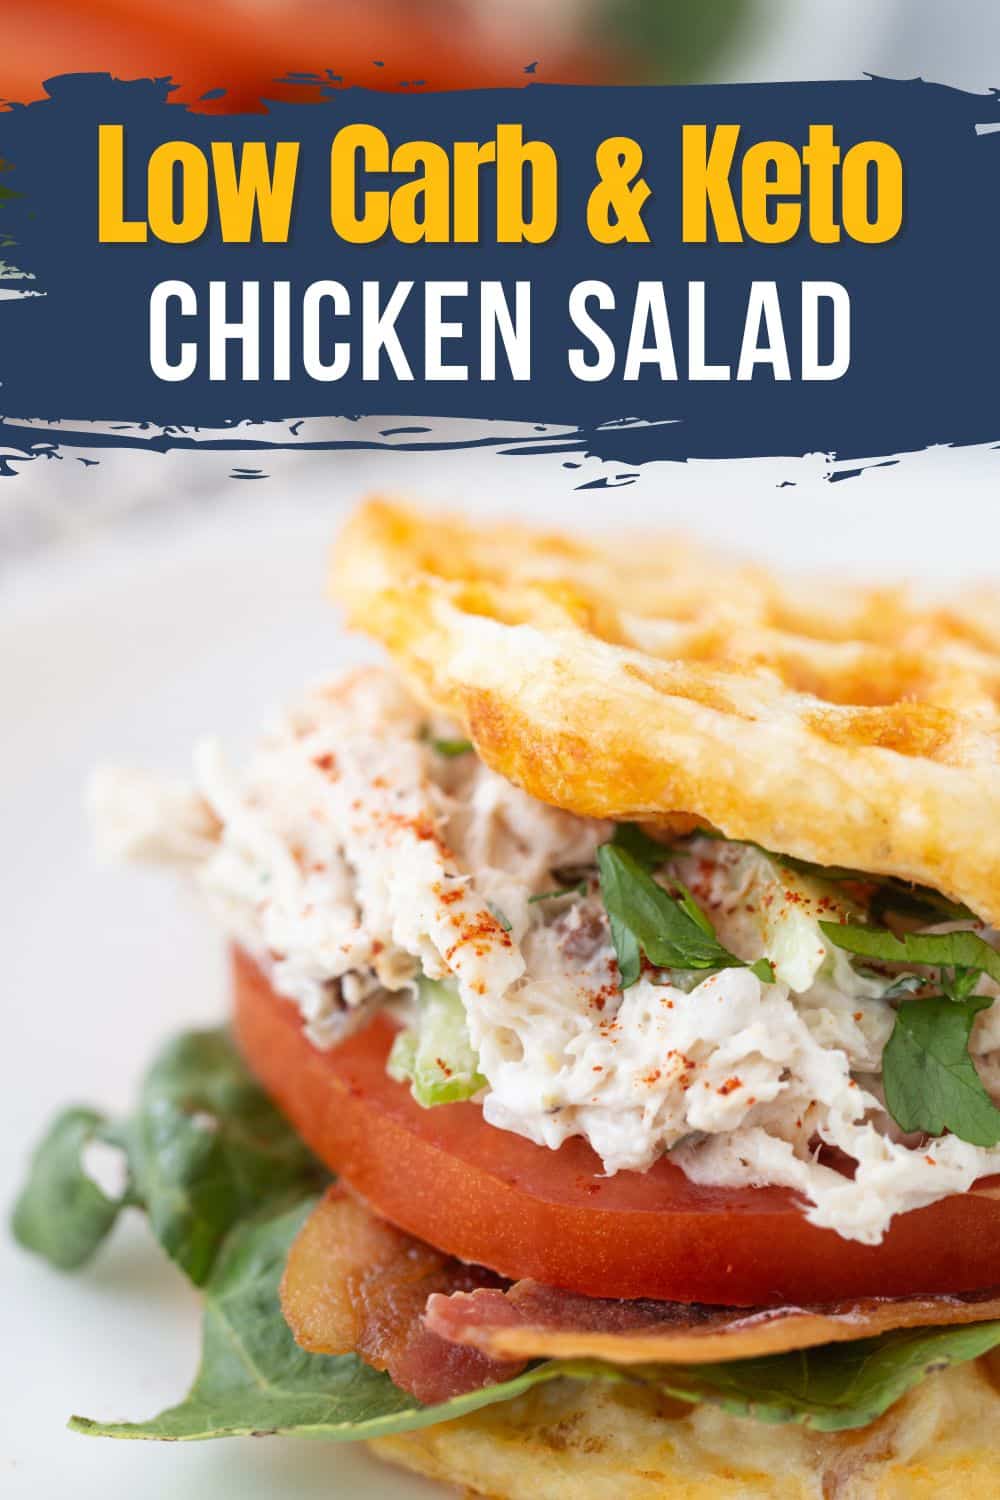 Keto chicken salad lettering banner over sandwich stuffed with shredded chicken, pecans, celery, tomato, bacon, lettuce, parsley between chaffles